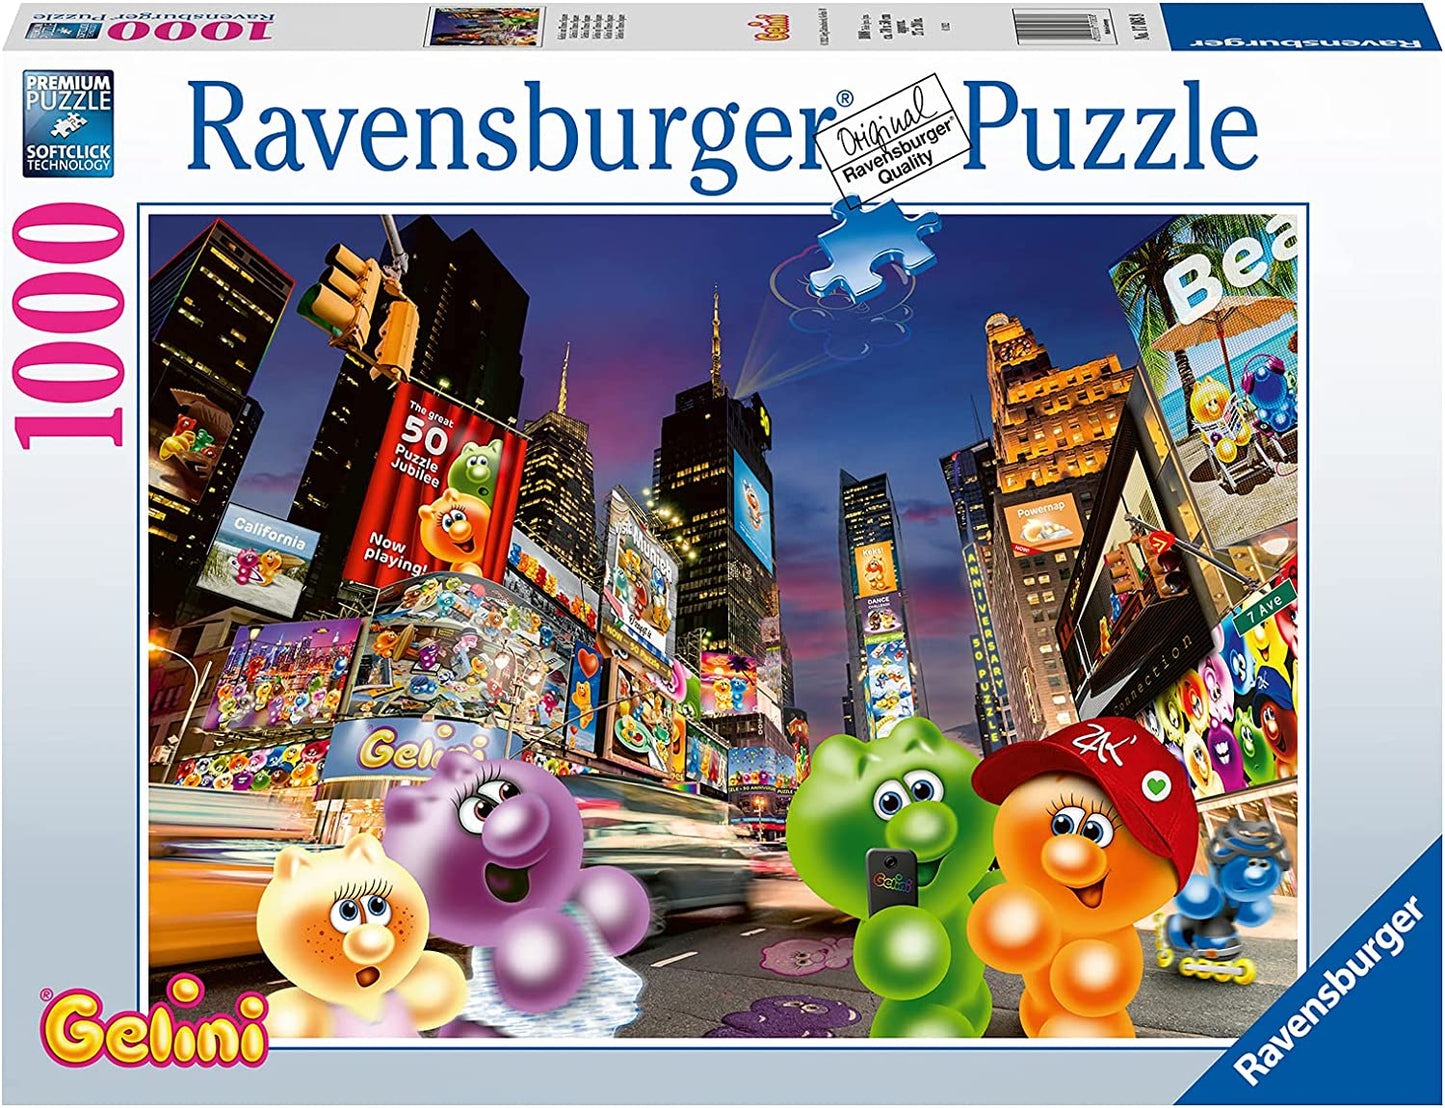 Ravensburger: Gelini Time Square by Jorg Zahradniceck, 1000 Piece Puzzle